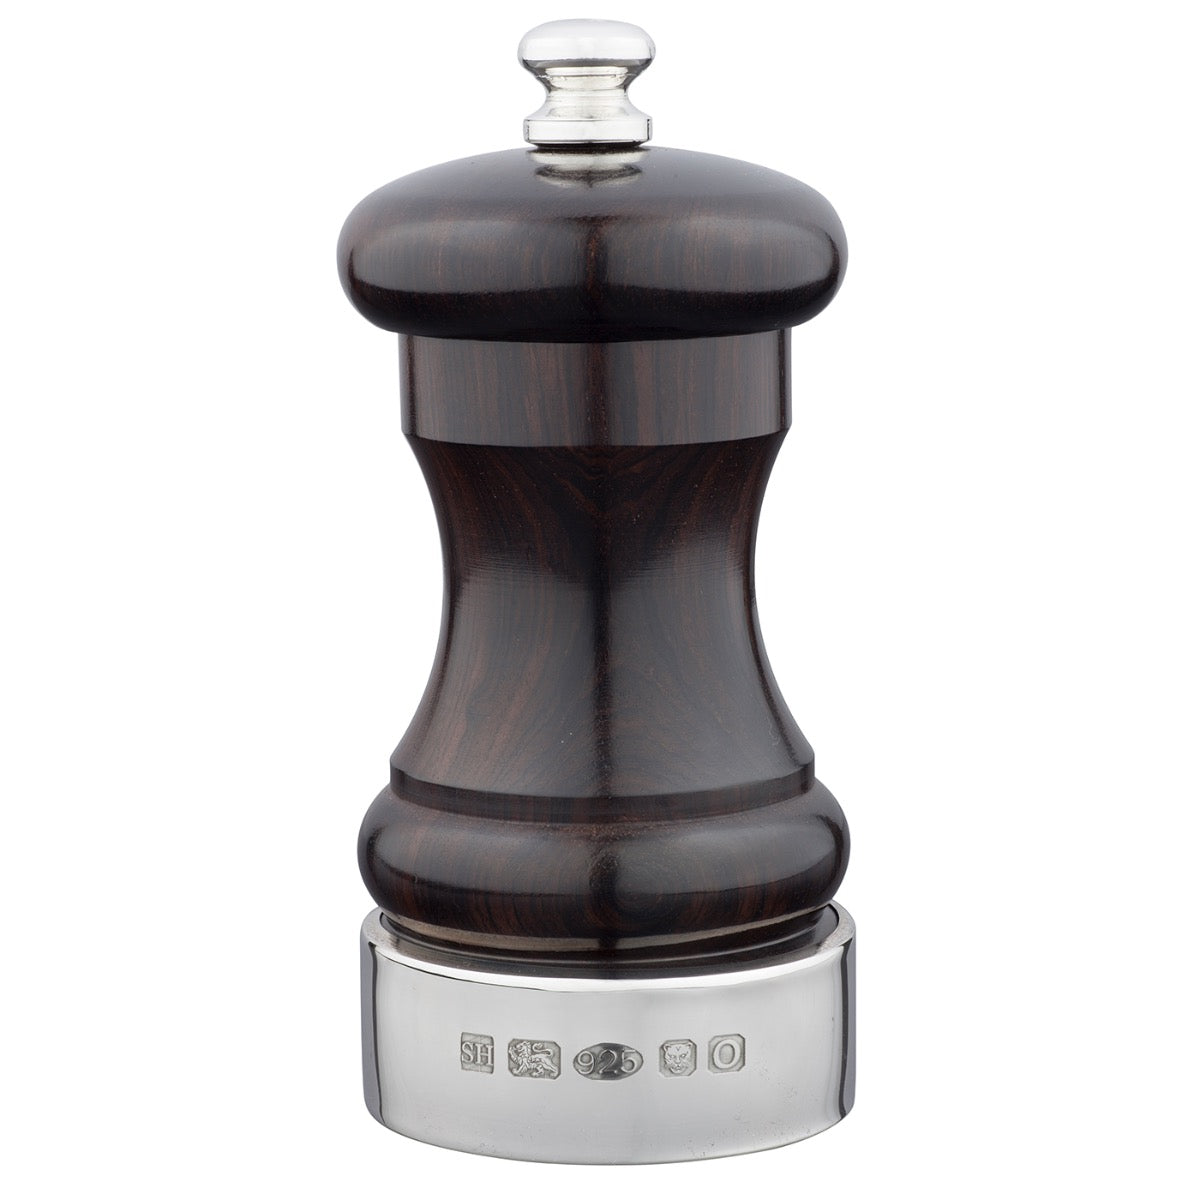 Blackwood and Silver Peppermill | Hersey & Son Silversmiths